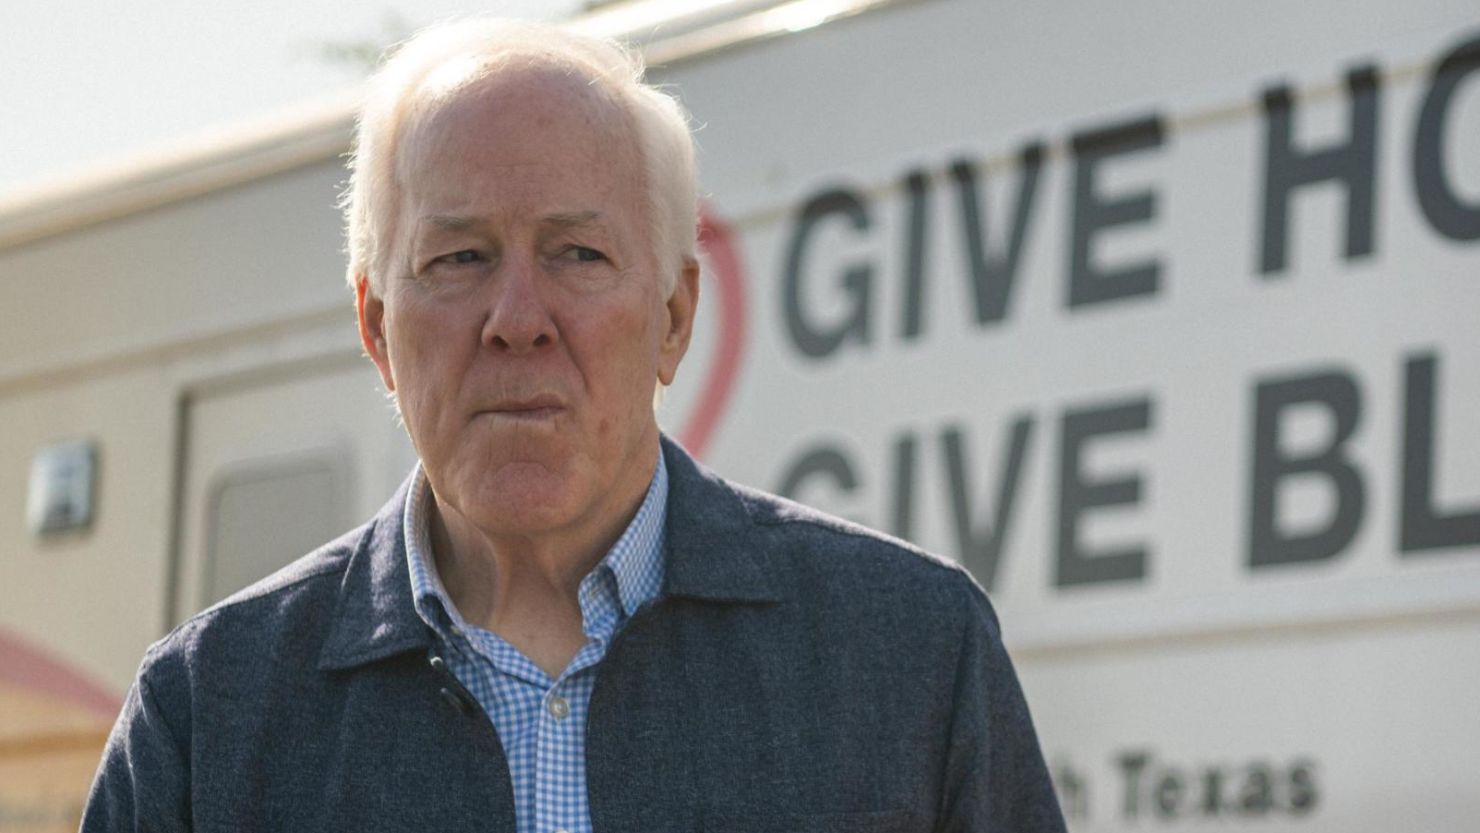 Texas Sen. John Cornyn arrives to donate blood at an emergency blood drive on May 25 in Uvalde, Texas.